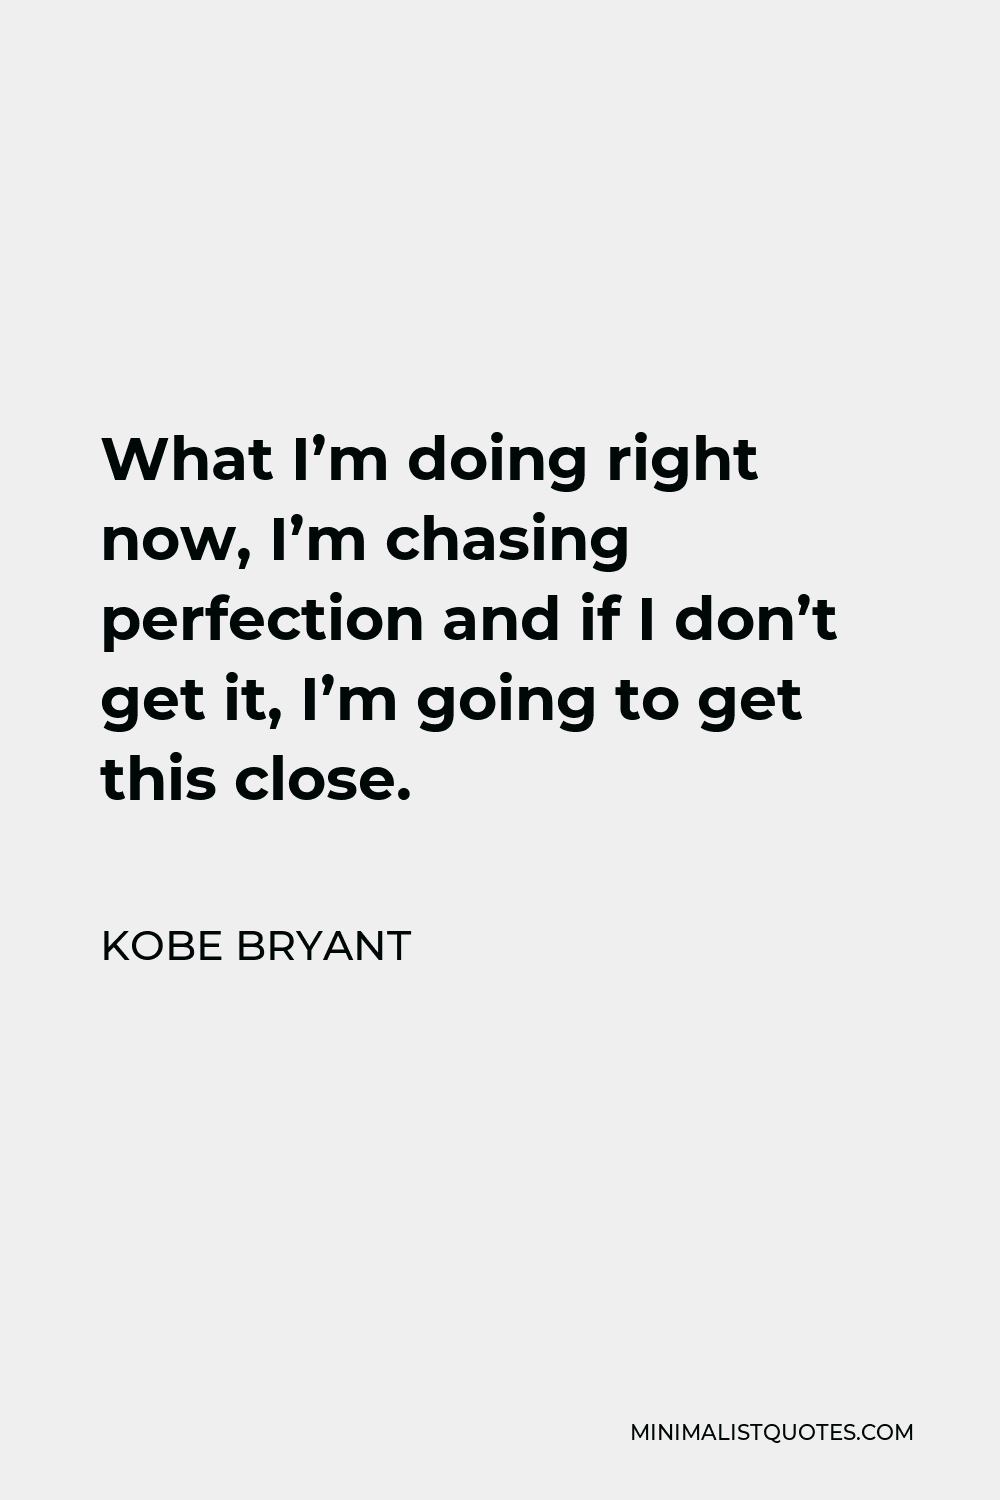 Kobe Bryant Quote - What I’m doing right now, I’m chasing perfection and if I don’t get it, I’m going to get this close.